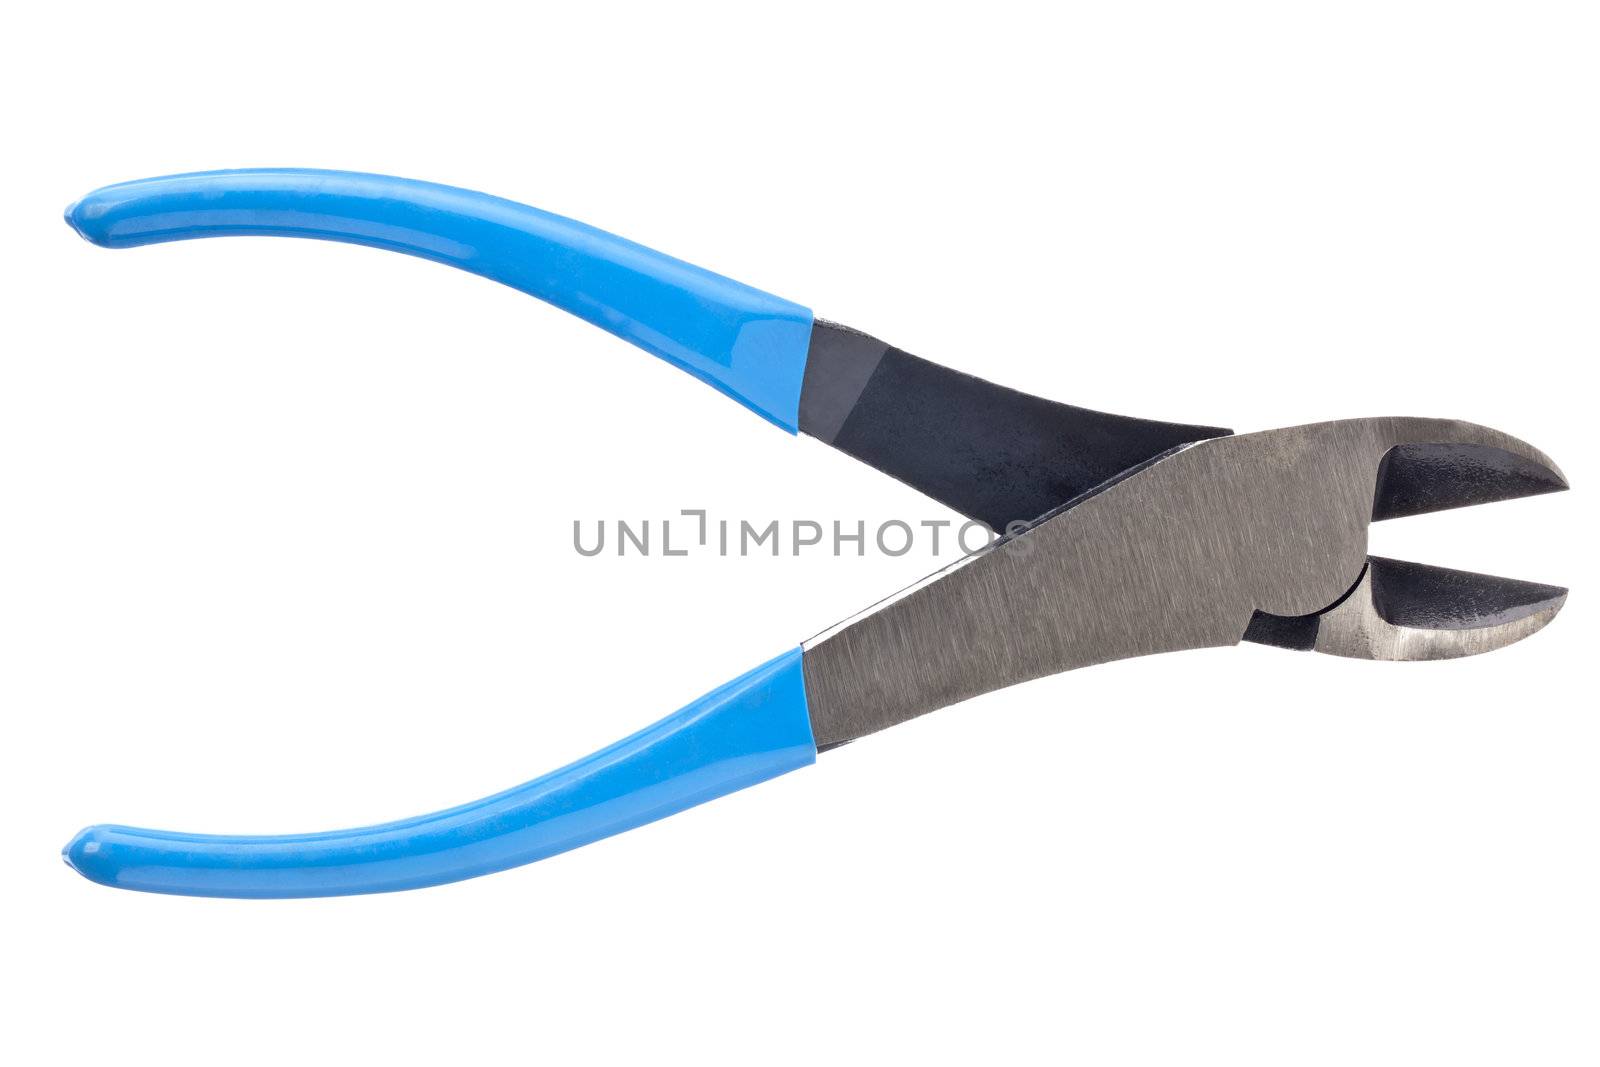 Image of metal wire cutter isolated on white background